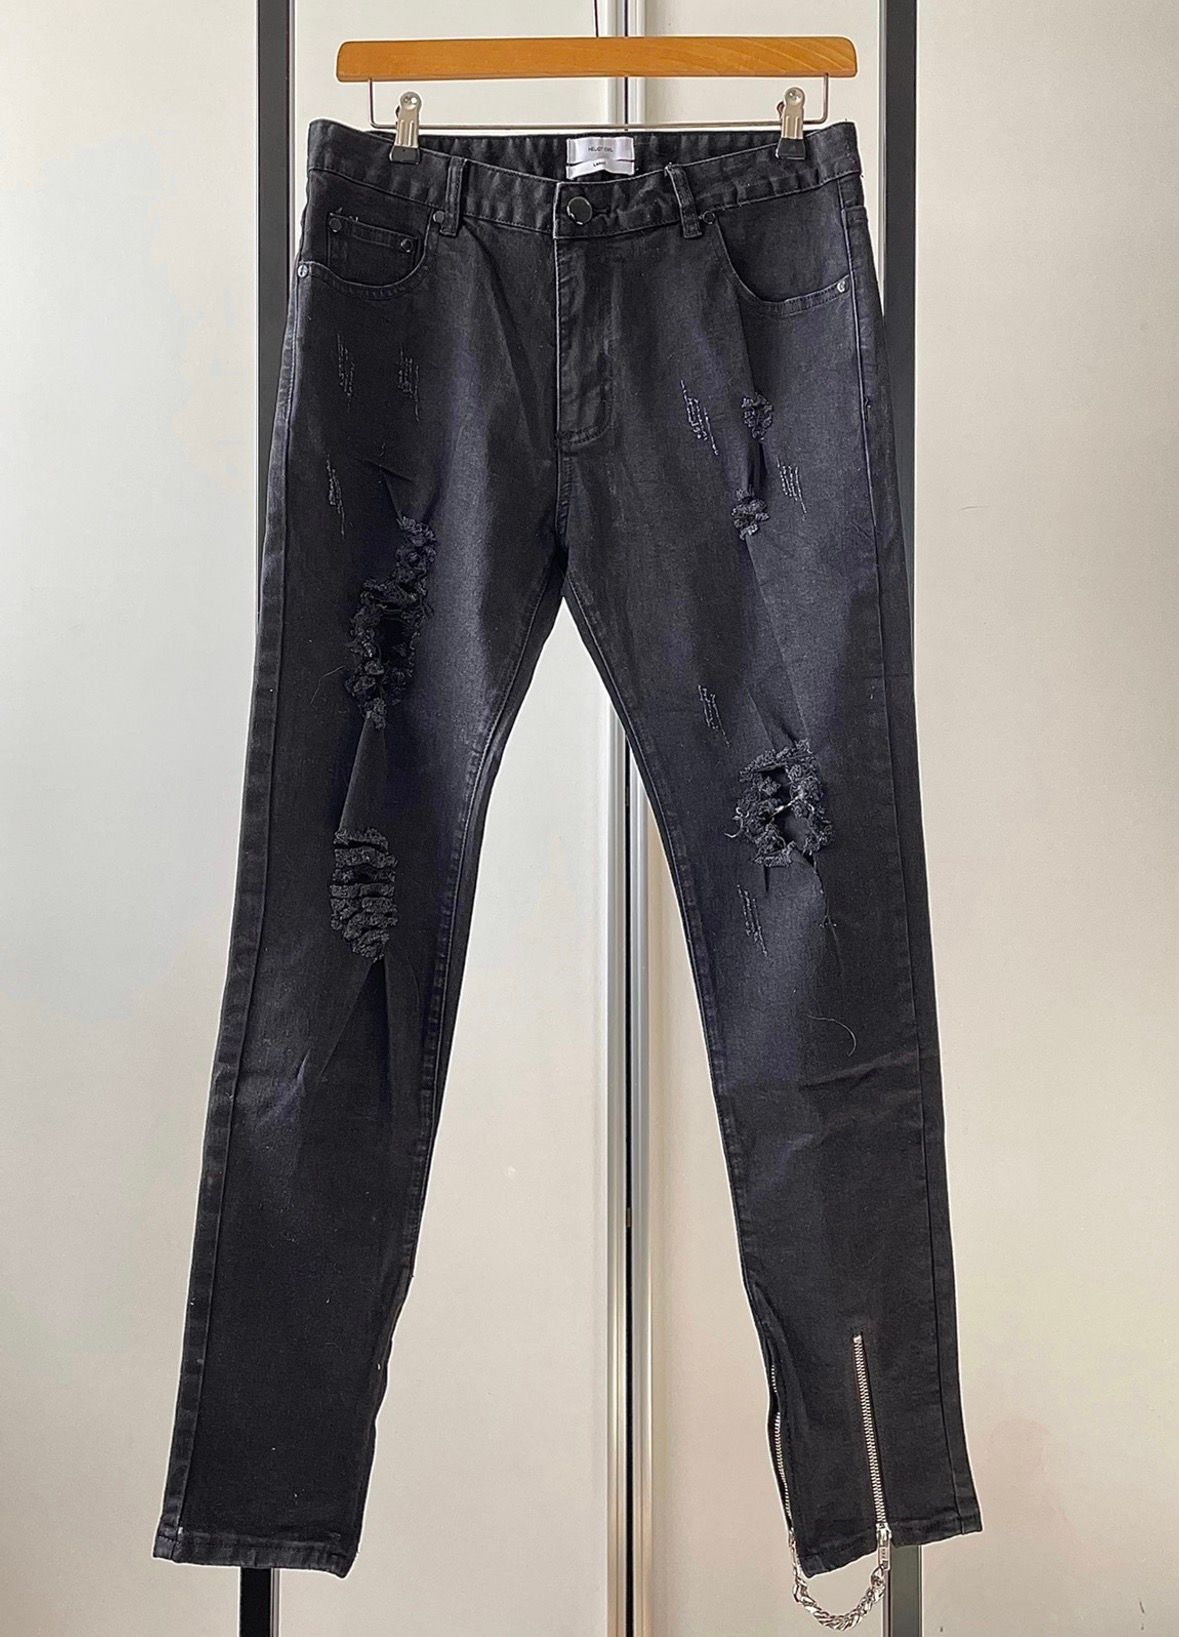 Heliot Emil Ripped Denim Pants with side Zippers - 1